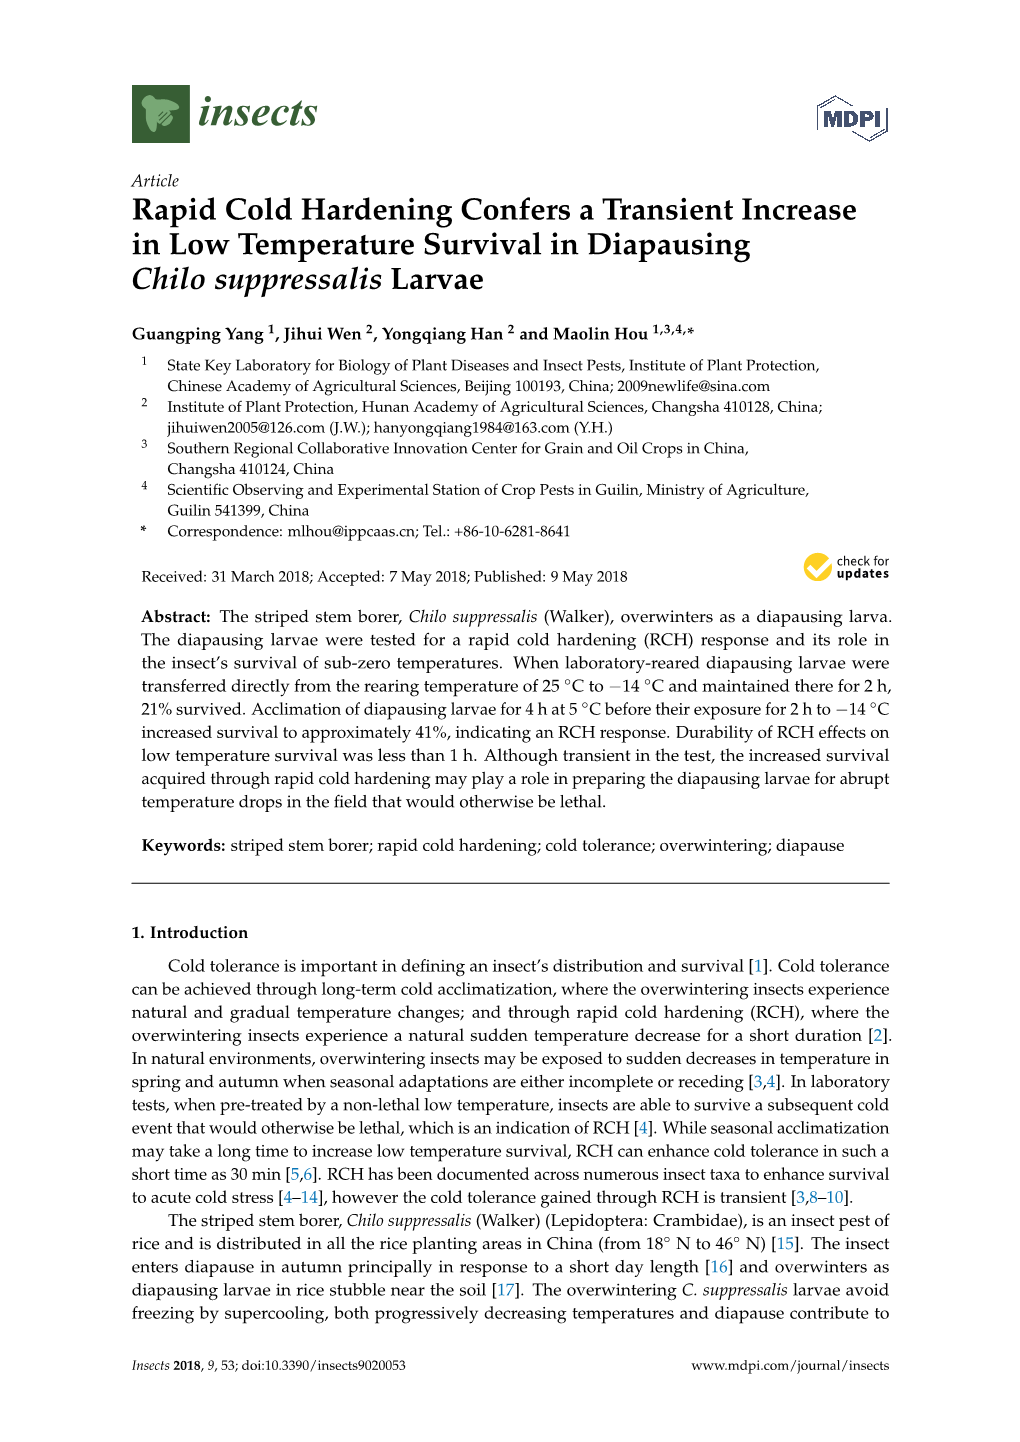 Rapid Cold Hardening Confers a Transient Increase in Low Temperature Survival in Diapausing Chilo Suppressalis Larvae